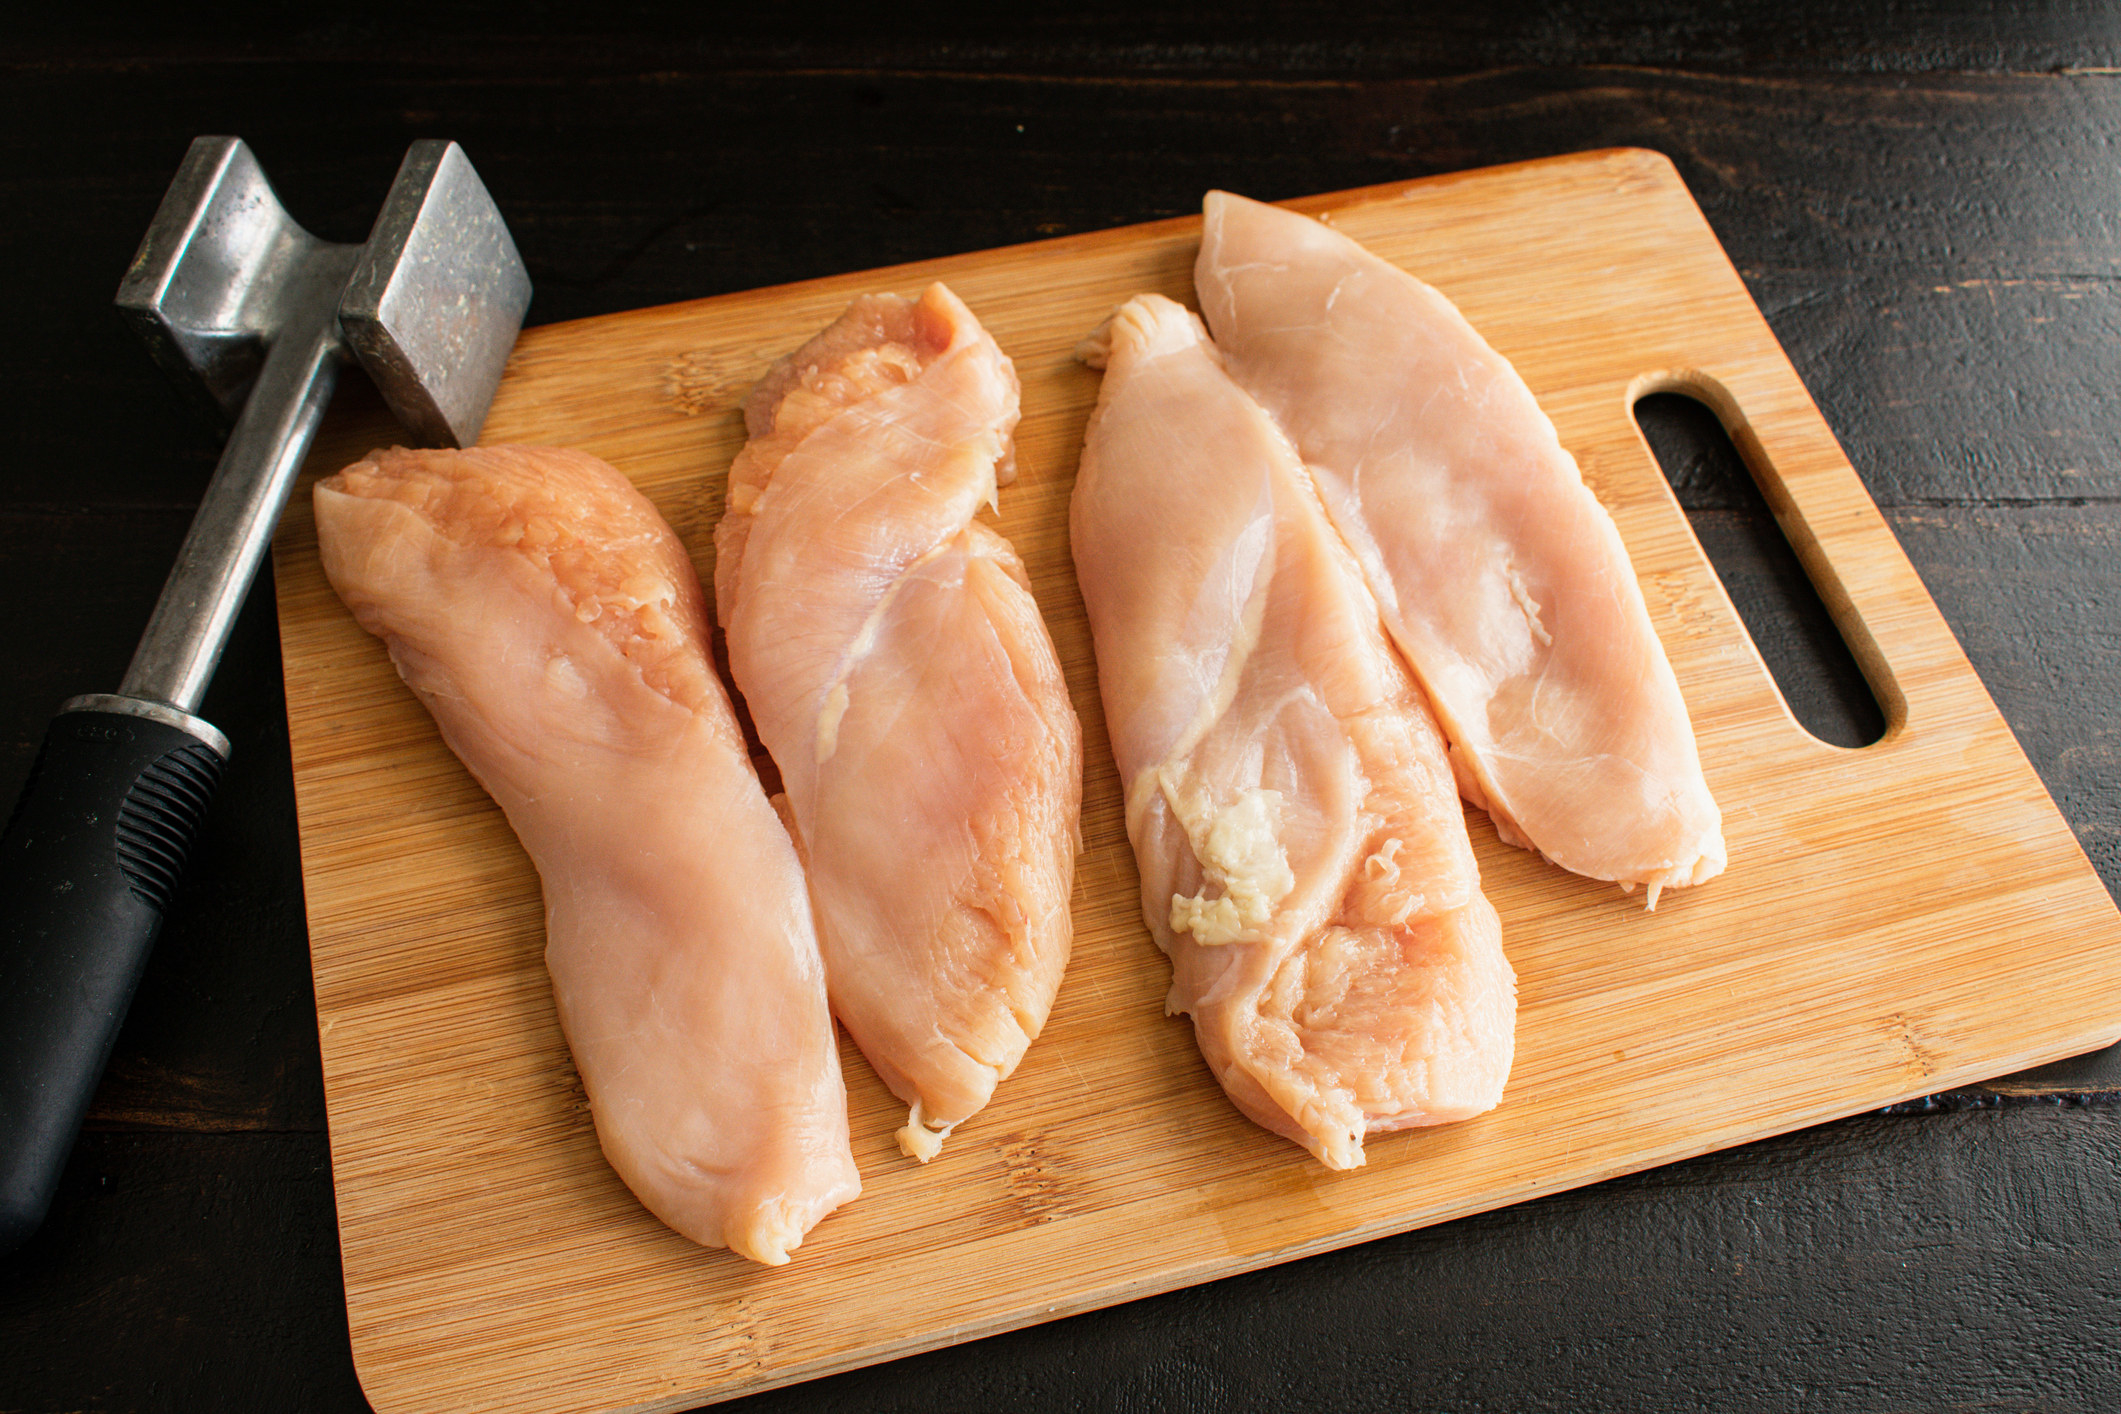 Pounded chicken breasts on a cutting board.